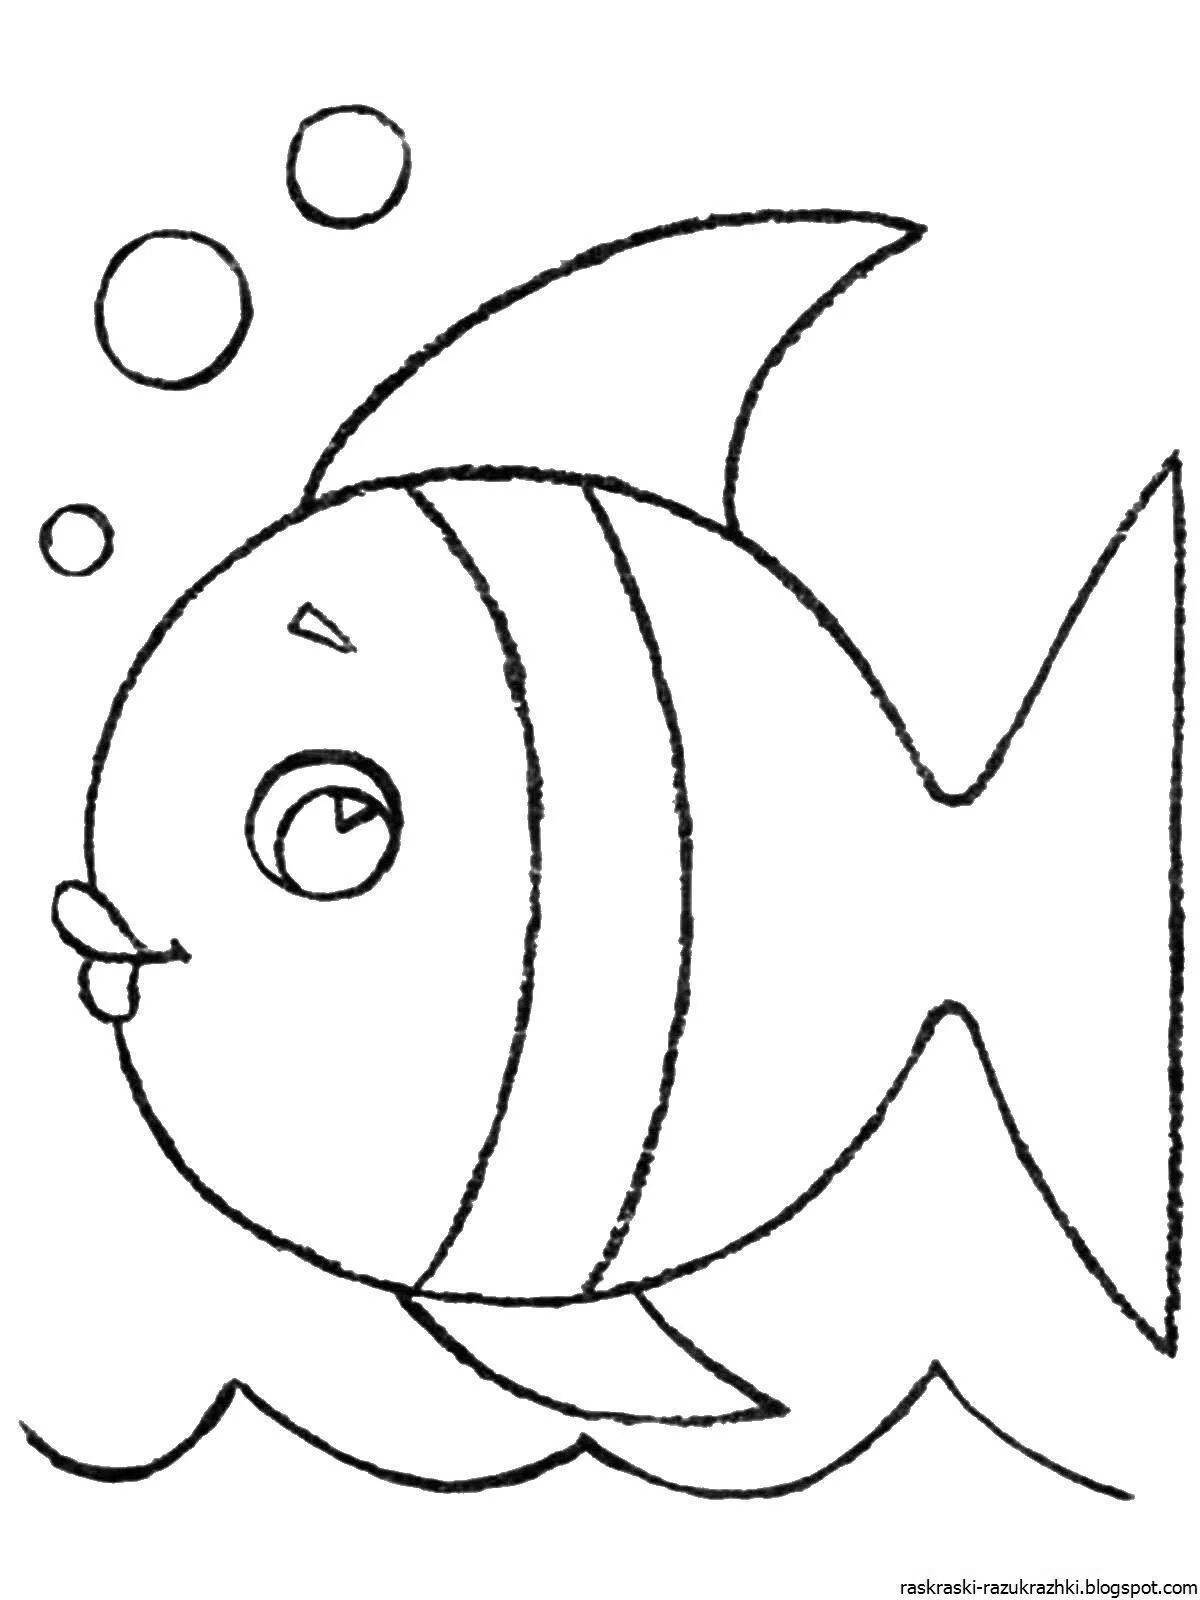 Awesome fish coloring pages for 2-3 year olds